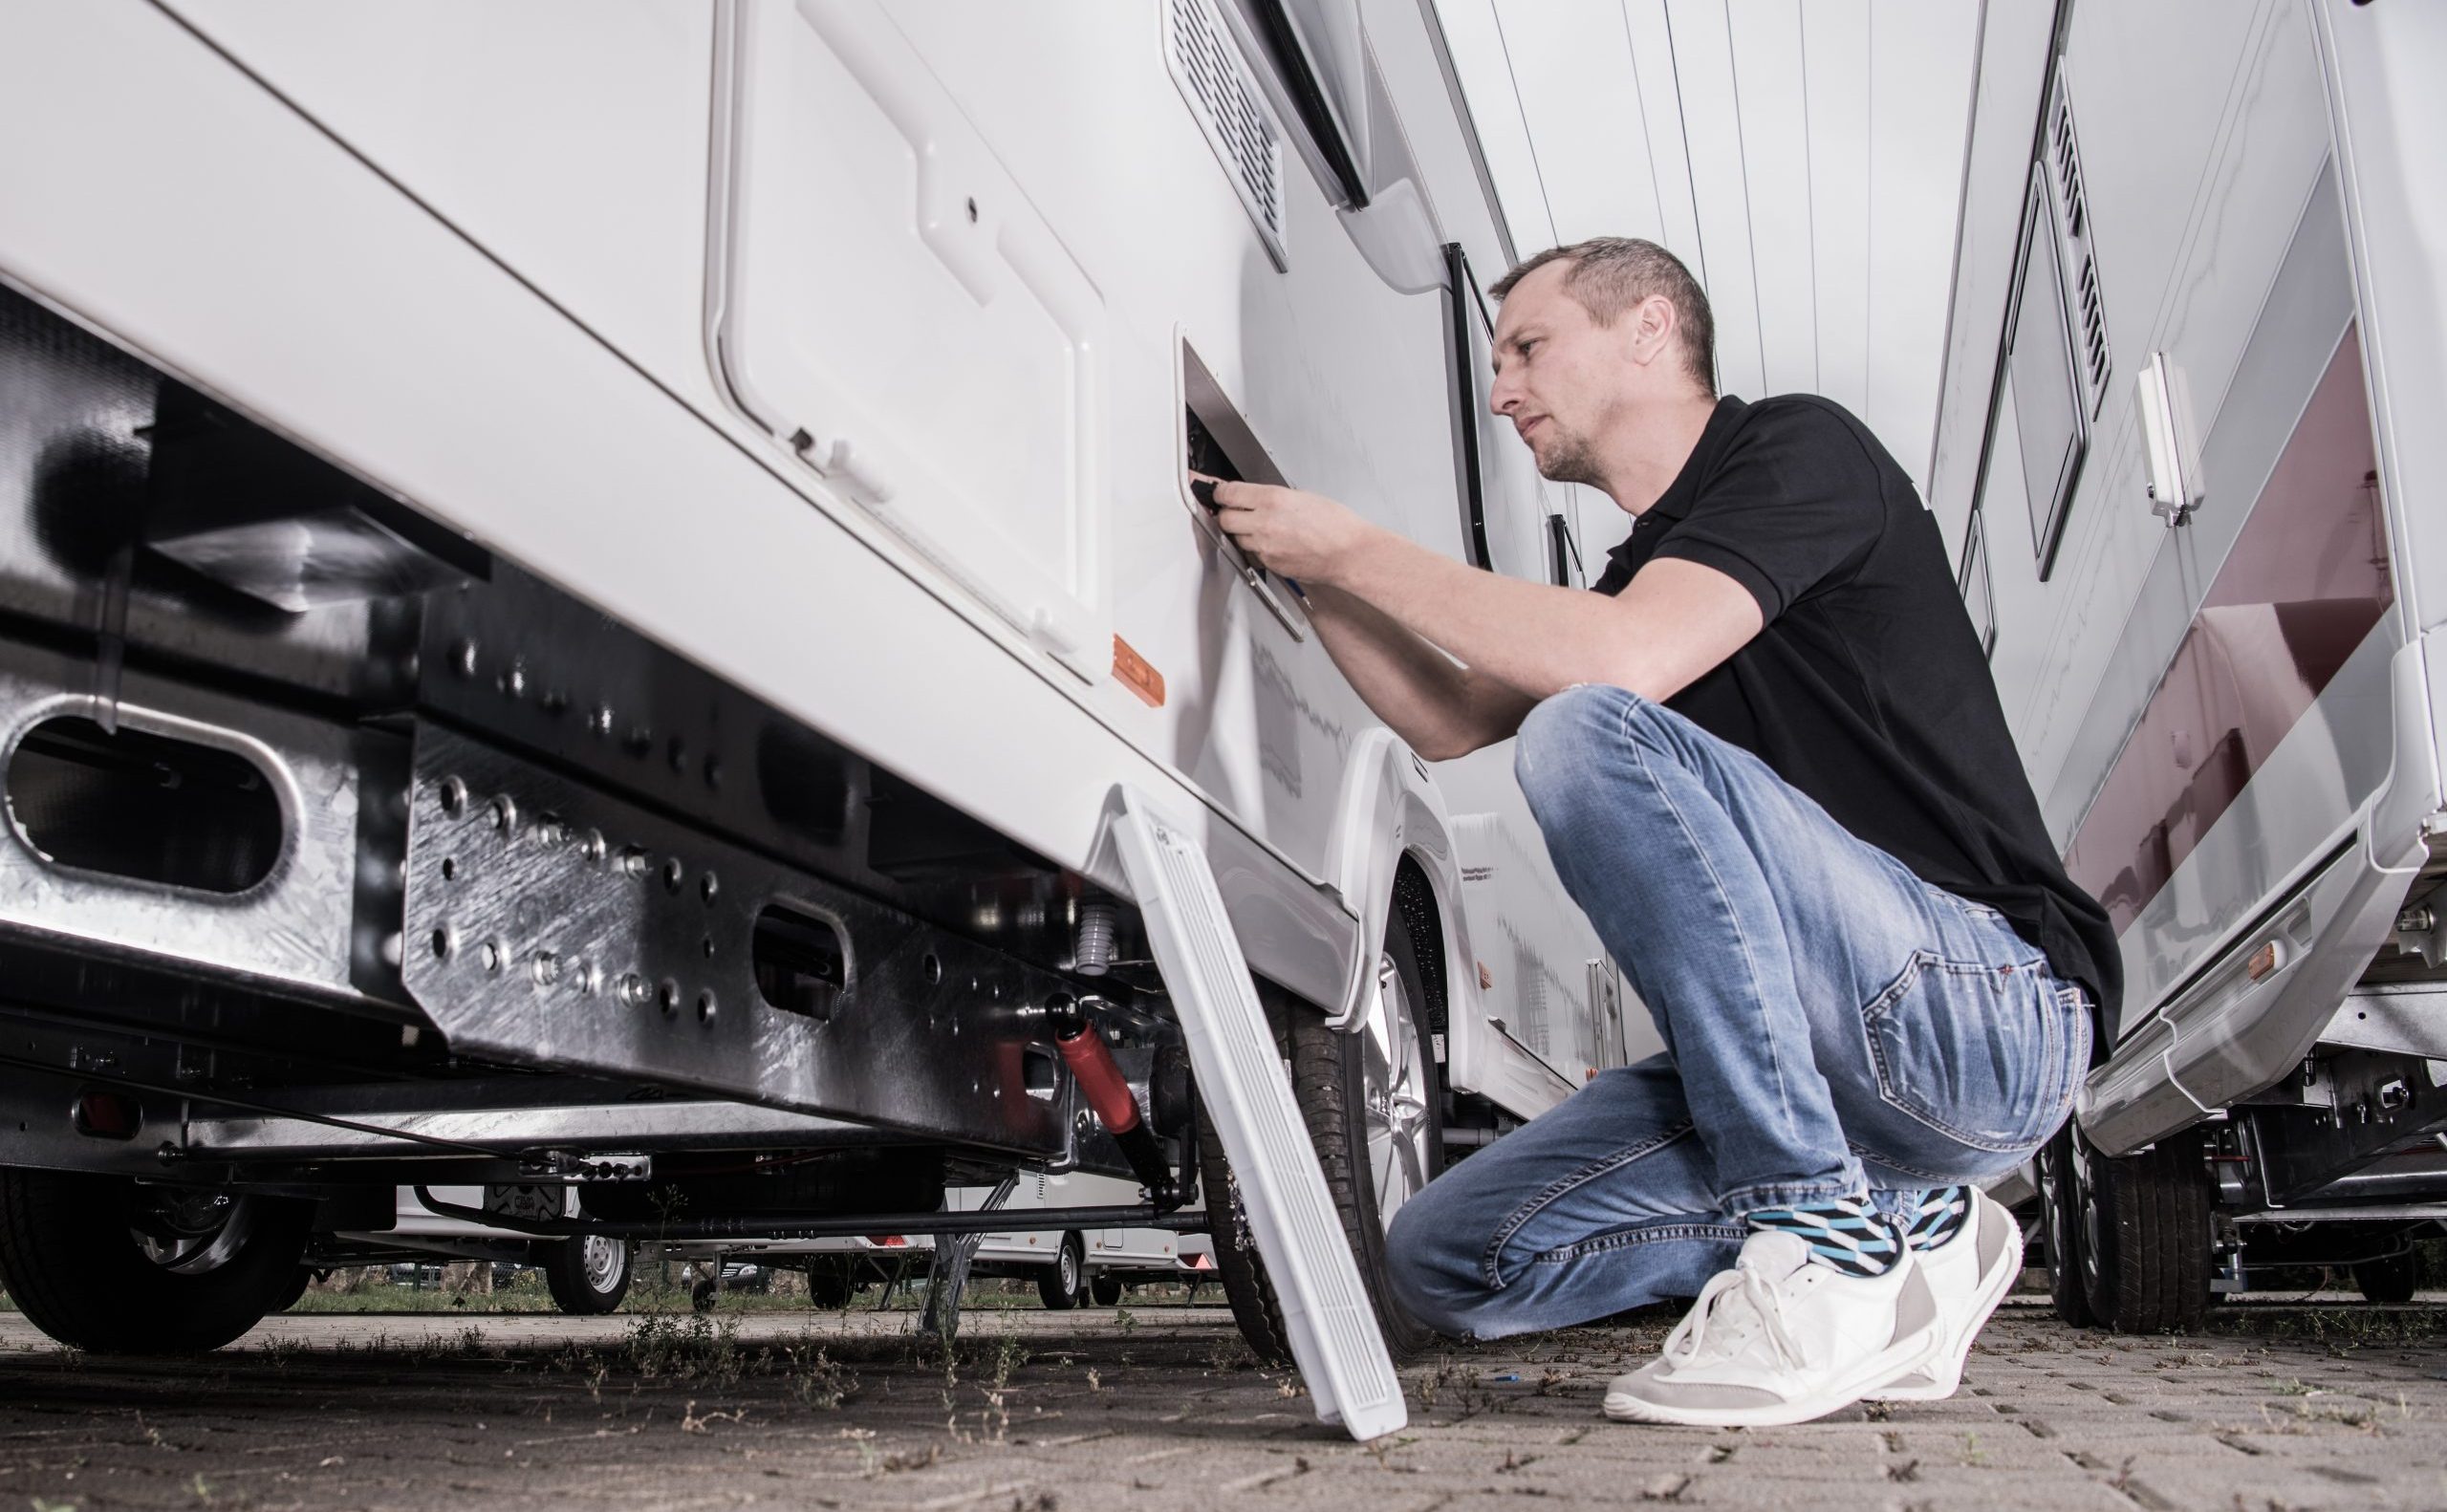 RV Consultation & Training Inspection Services